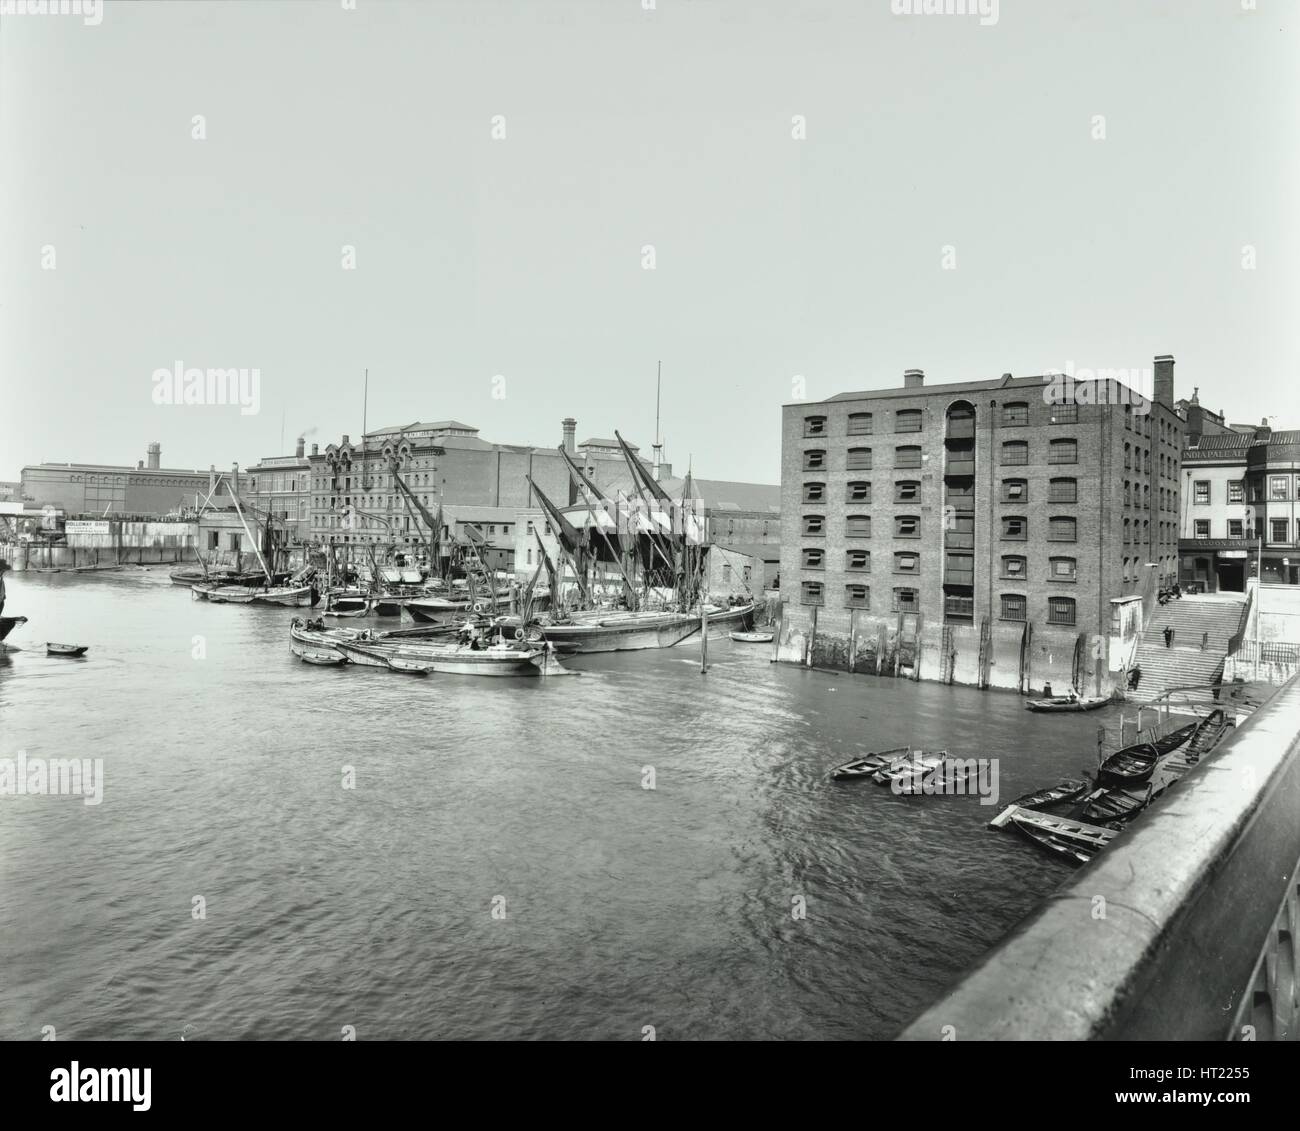 Boats and warehouses on the River Thames, Lambeth, London, 1906. Artist: Unknown. Stock Photo